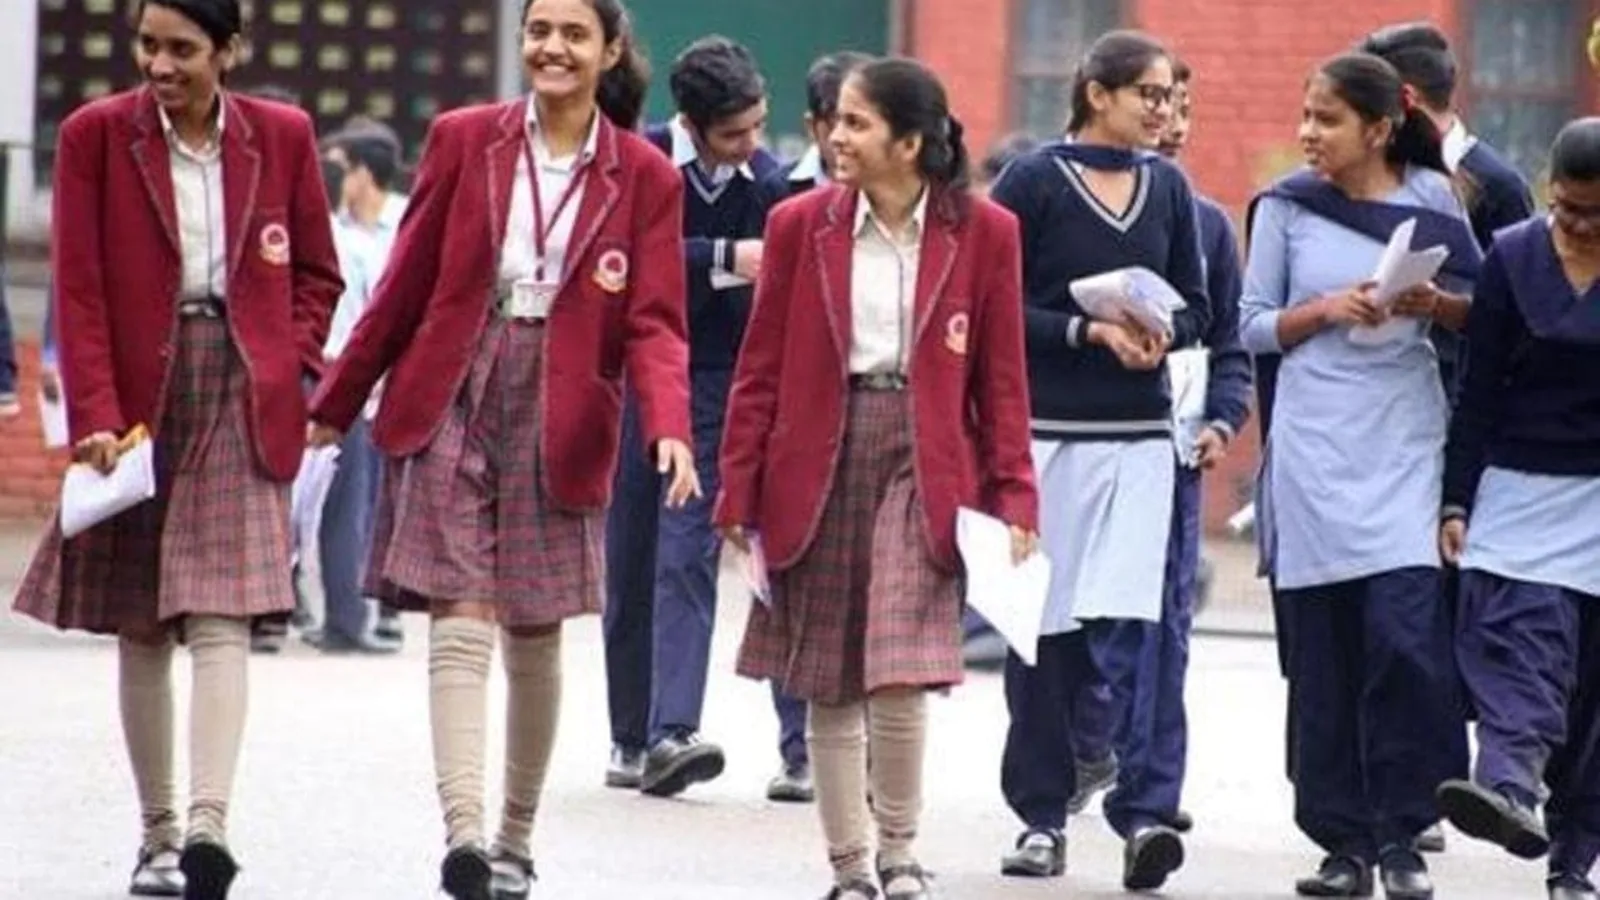 UP Board Class 10 results: Girls outperform boys, pass percentage 88.18%